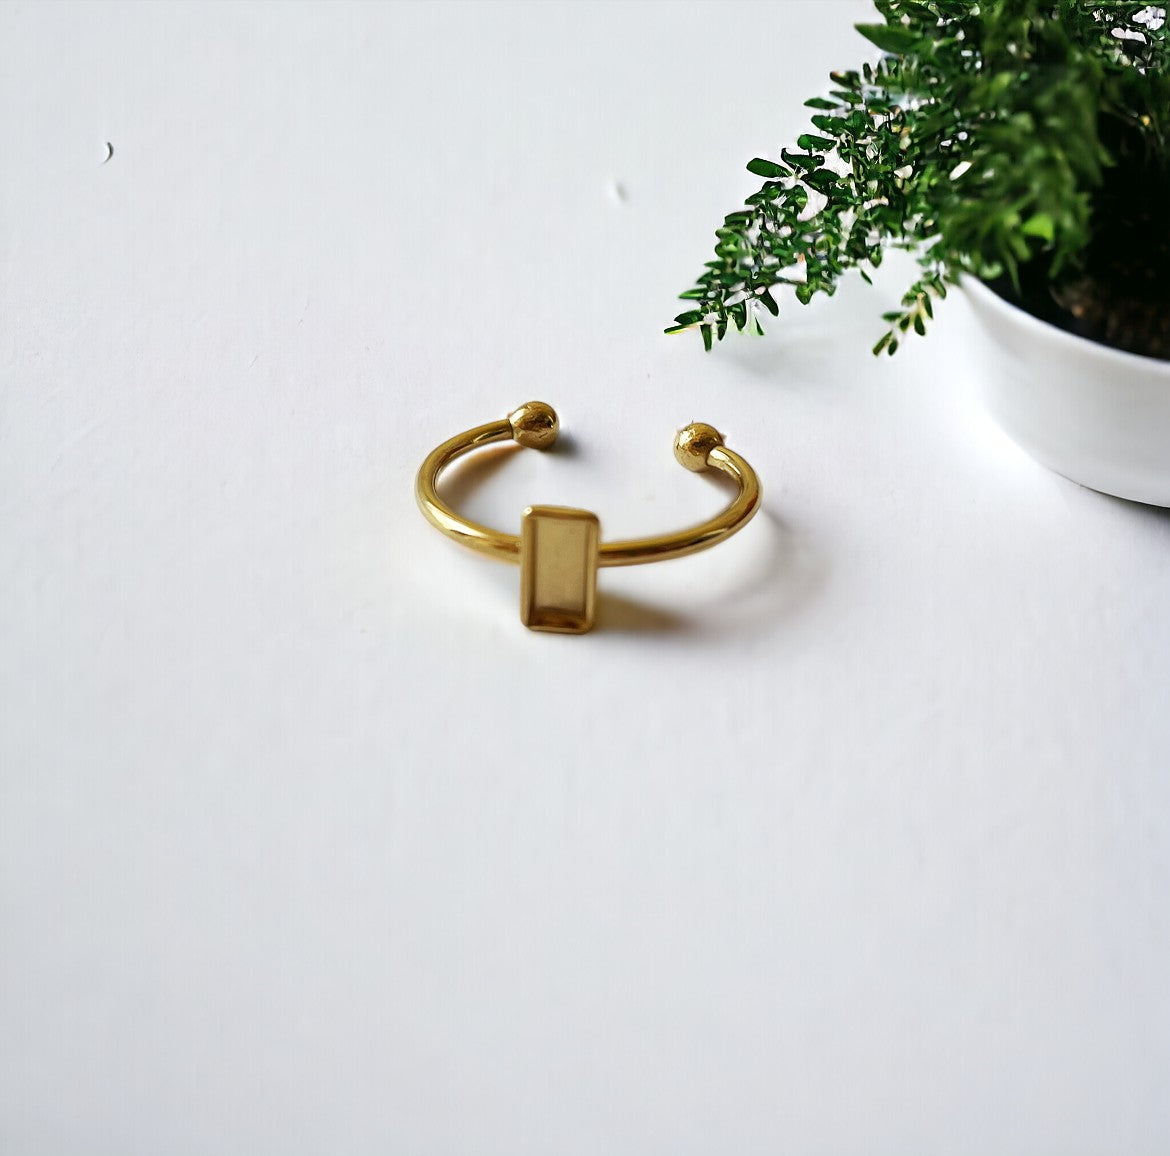 Little Rectangle Ring Base - Water resistant - Tarnish free - ClartStudios - Polymer clay Jewellery